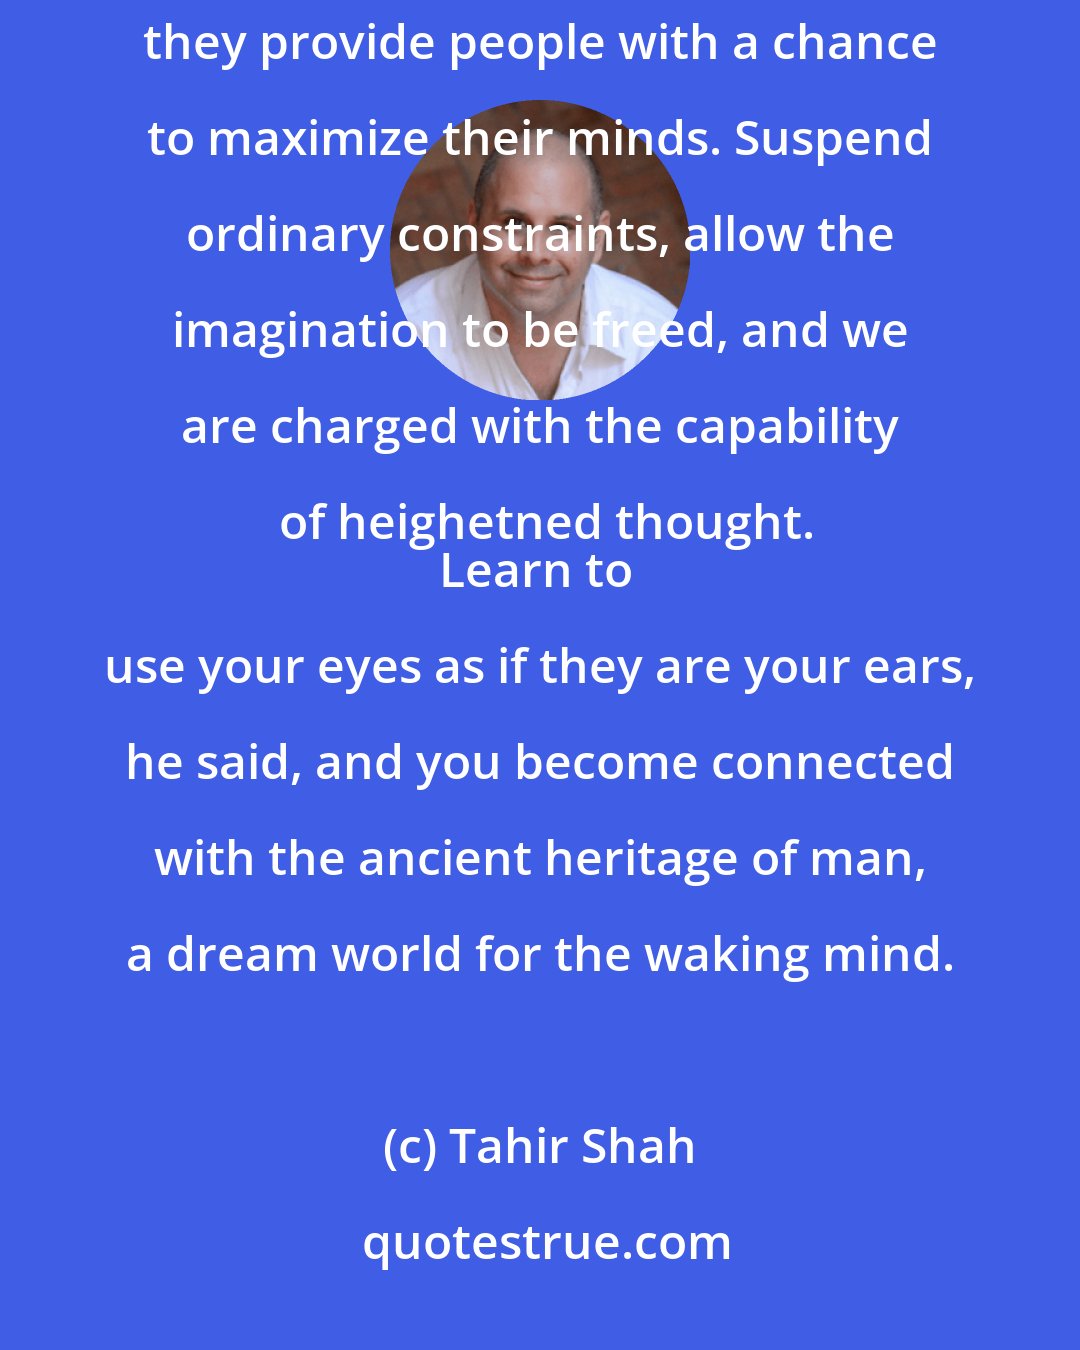 Tahir Shah: My father used to tell me that stories offer the listener a chance to escape but, more importantly, he said, they provide people with a chance to maximize their minds. Suspend ordinary constraints, allow the imagination to be freed, and we are charged with the capability of heighetned thought.
Learn to use your eyes as if they are your ears, he said, and you become connected with the ancient heritage of man, a dream world for the waking mind.